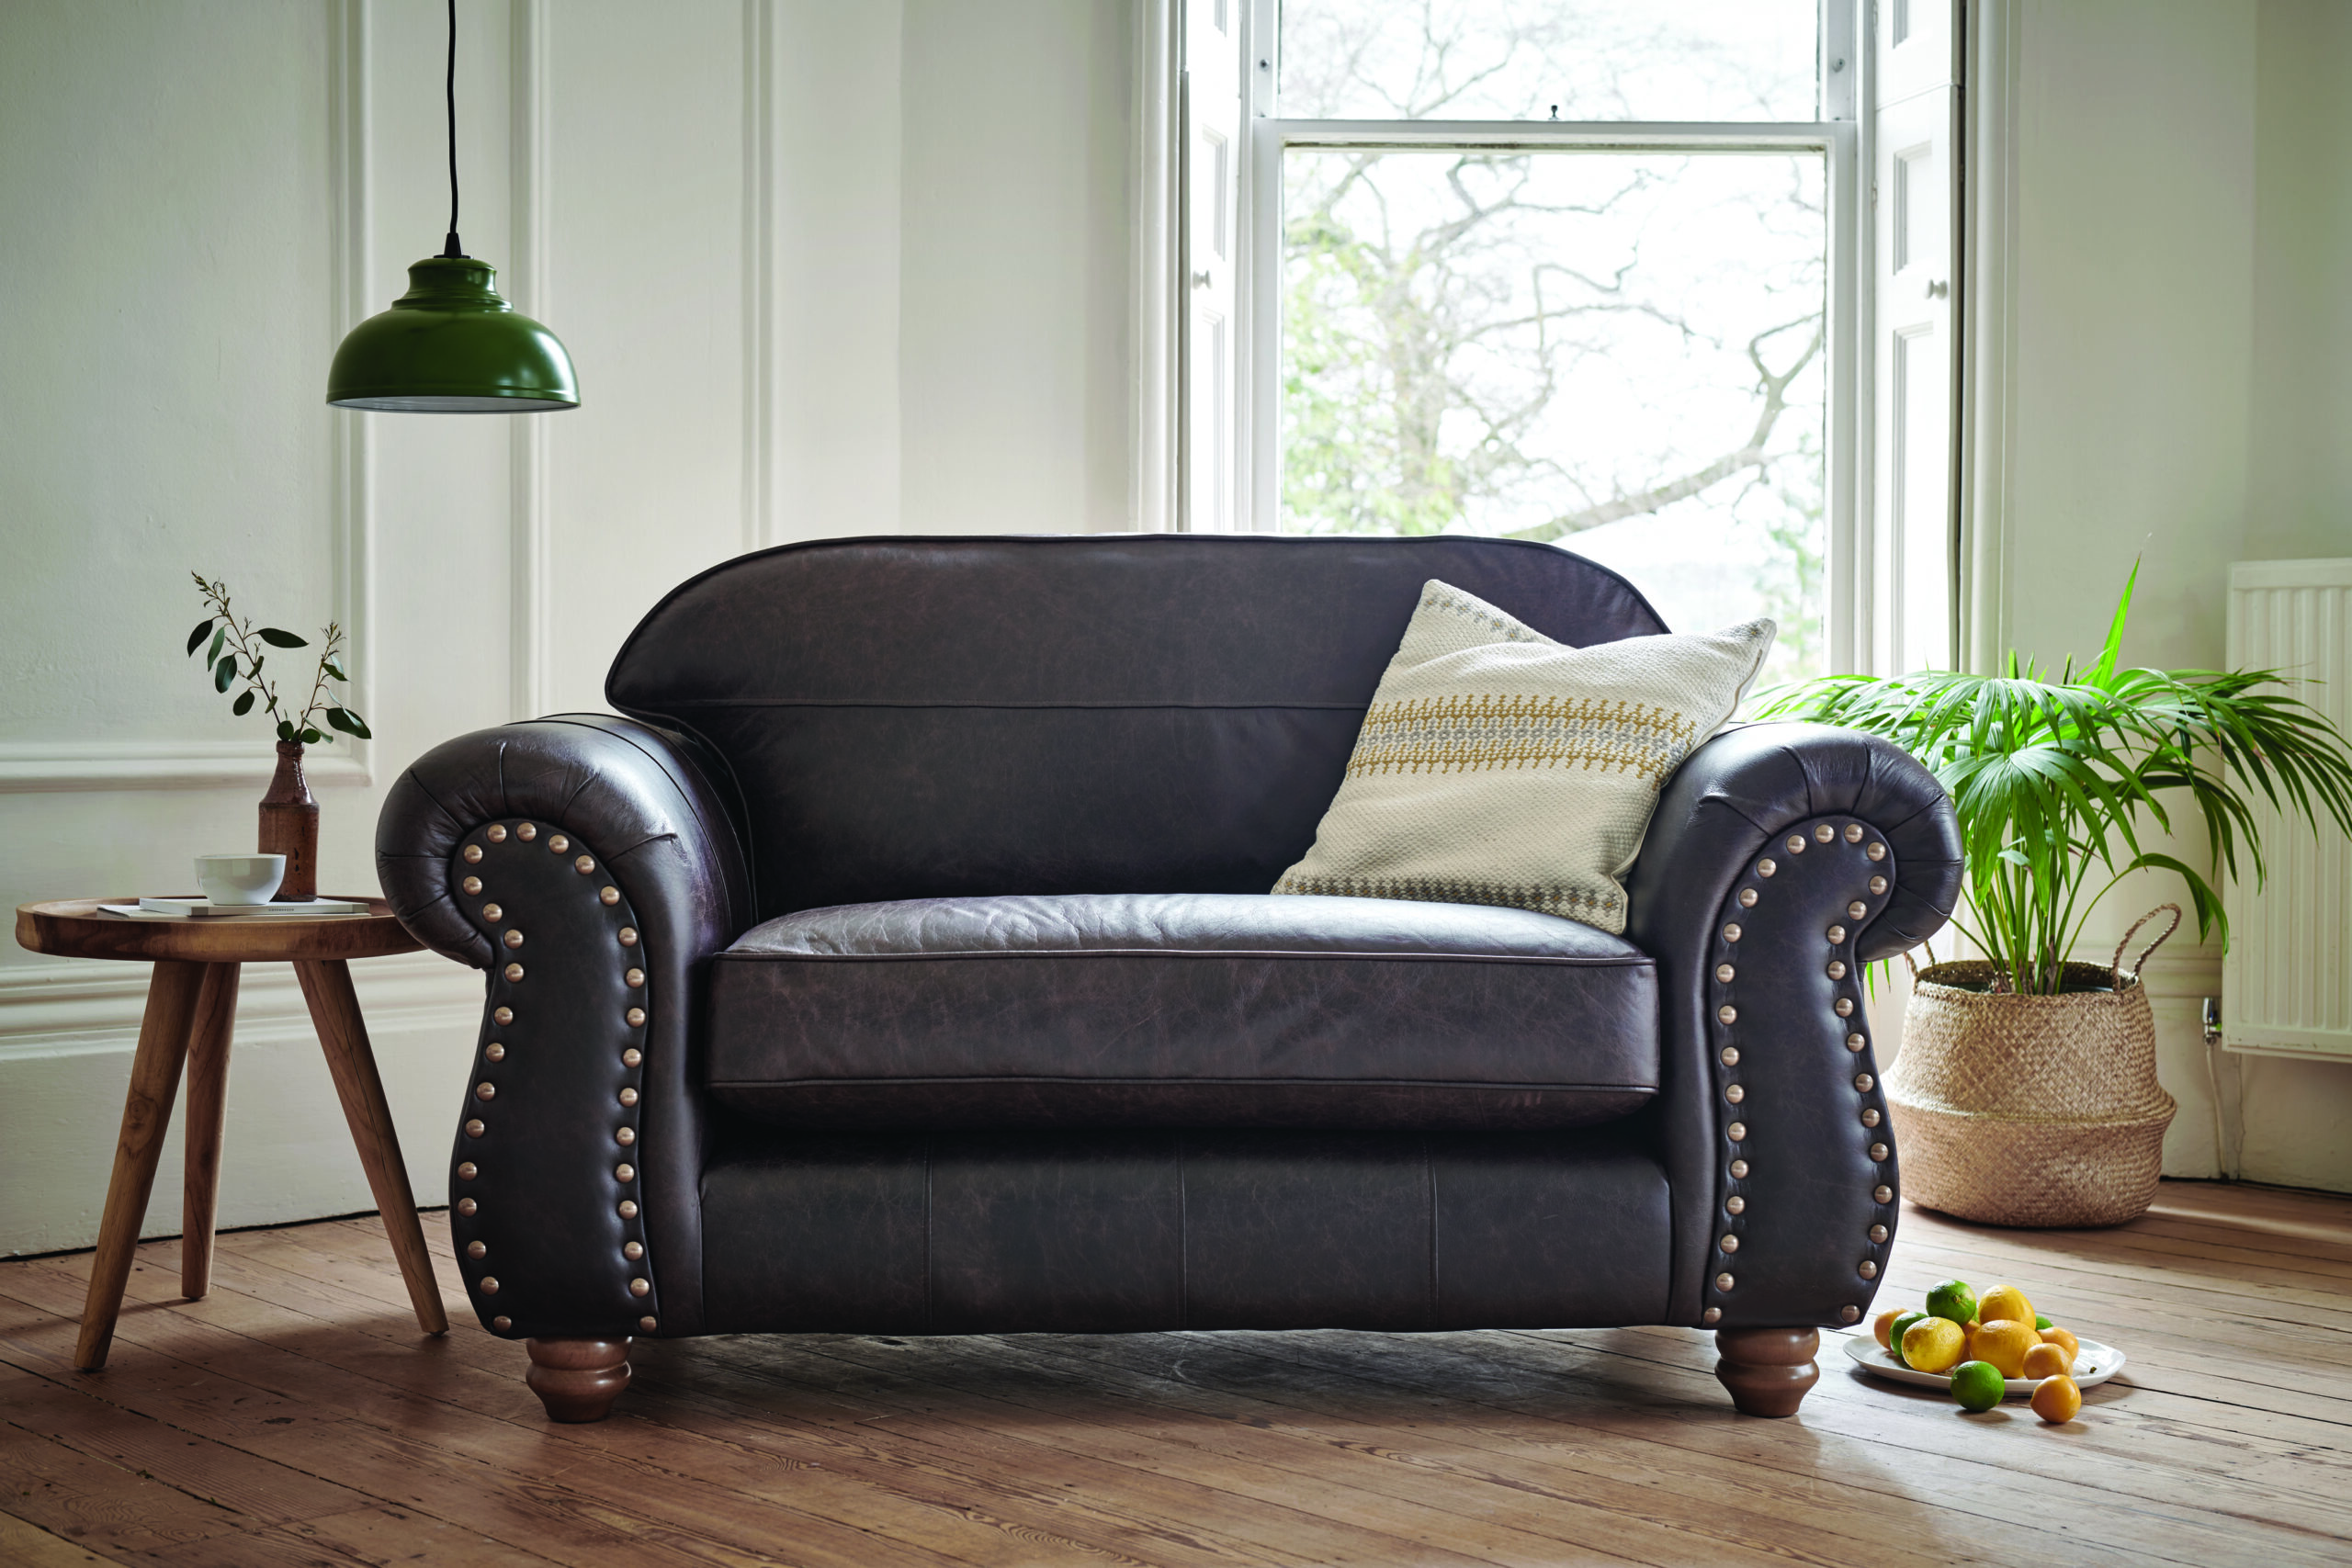 How to Save Your Leather Sofa: Ultimate Guide for Leather Sofa